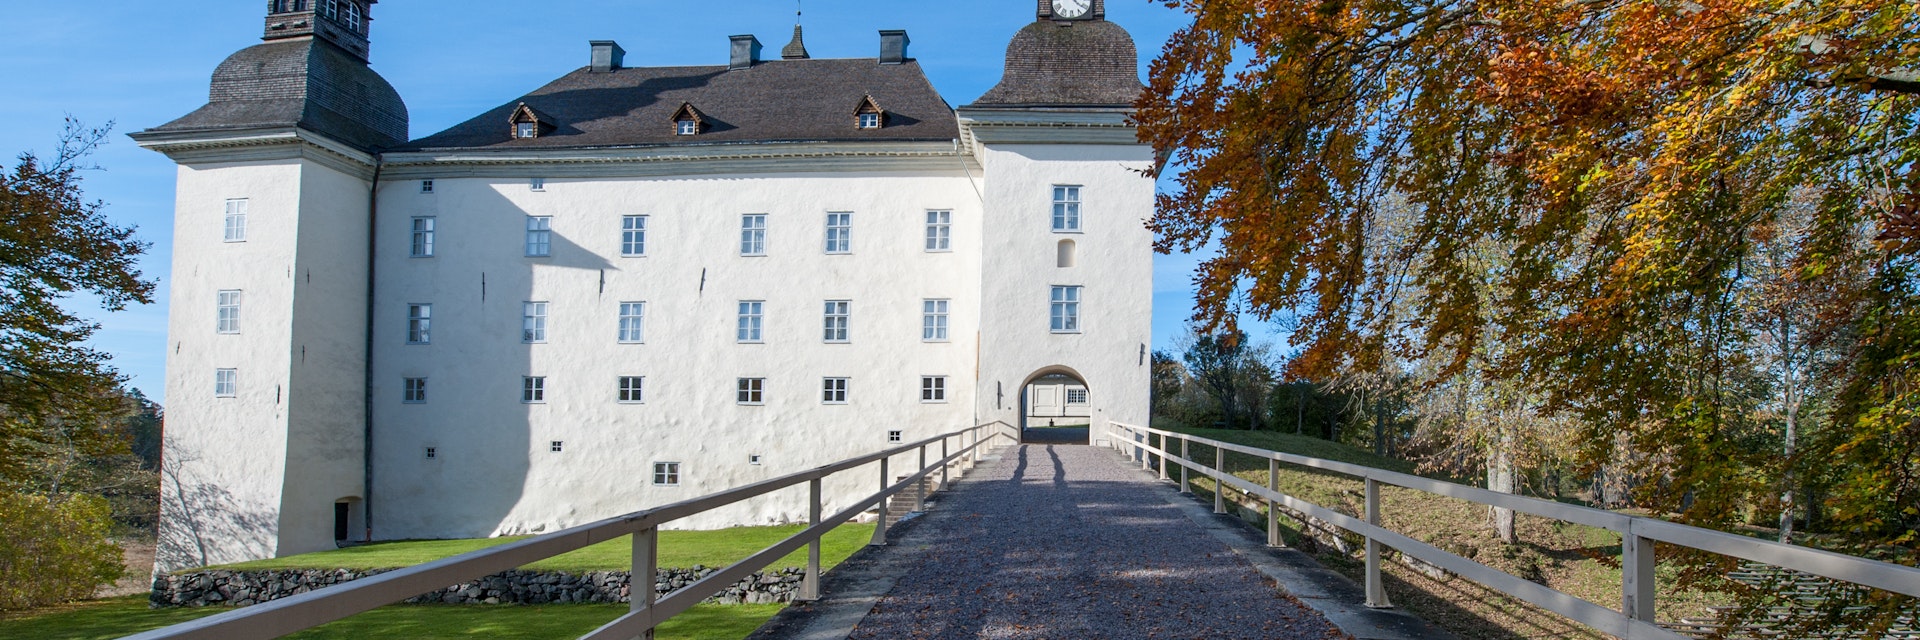 Ekenas castle during fall in the countryside outside Linkoping. 